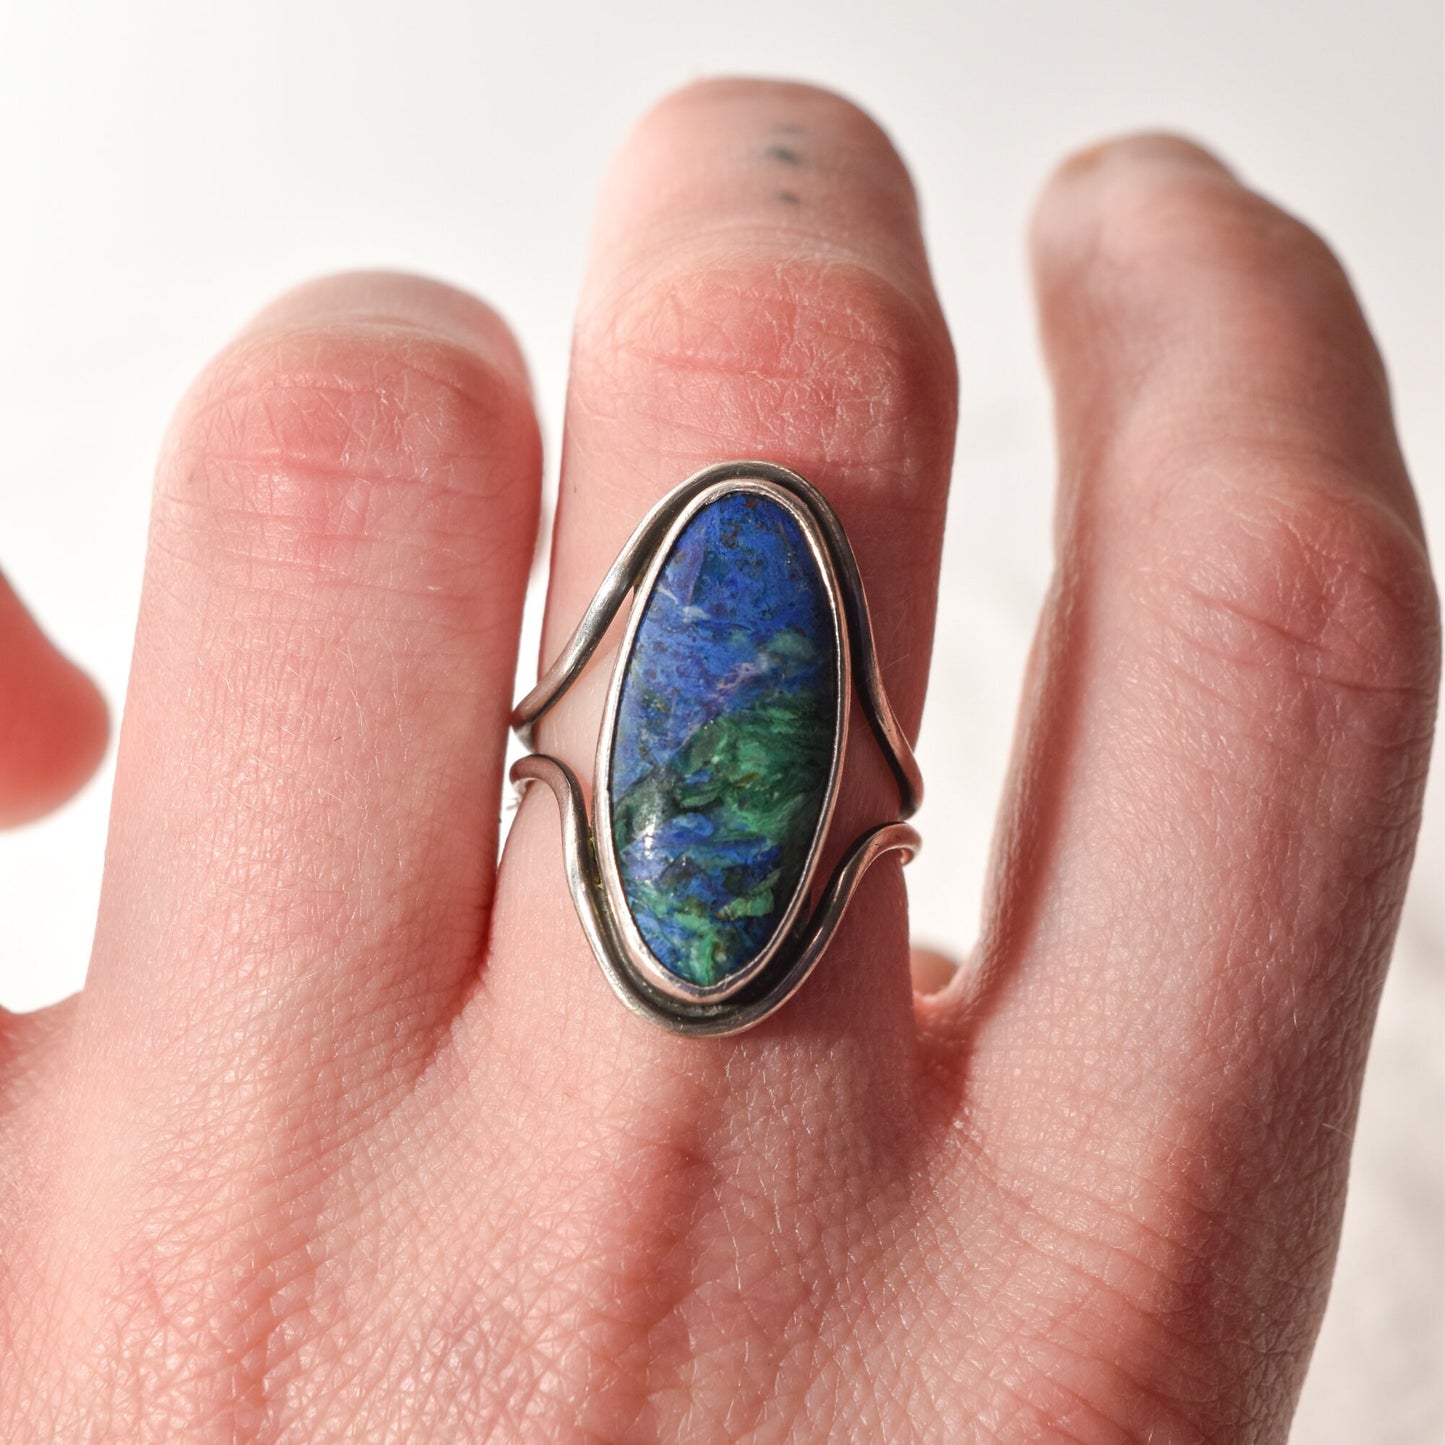 Modernist Sterling Silver Azurite Ring, Gemstone Jewelry, Size 7 1/2 US